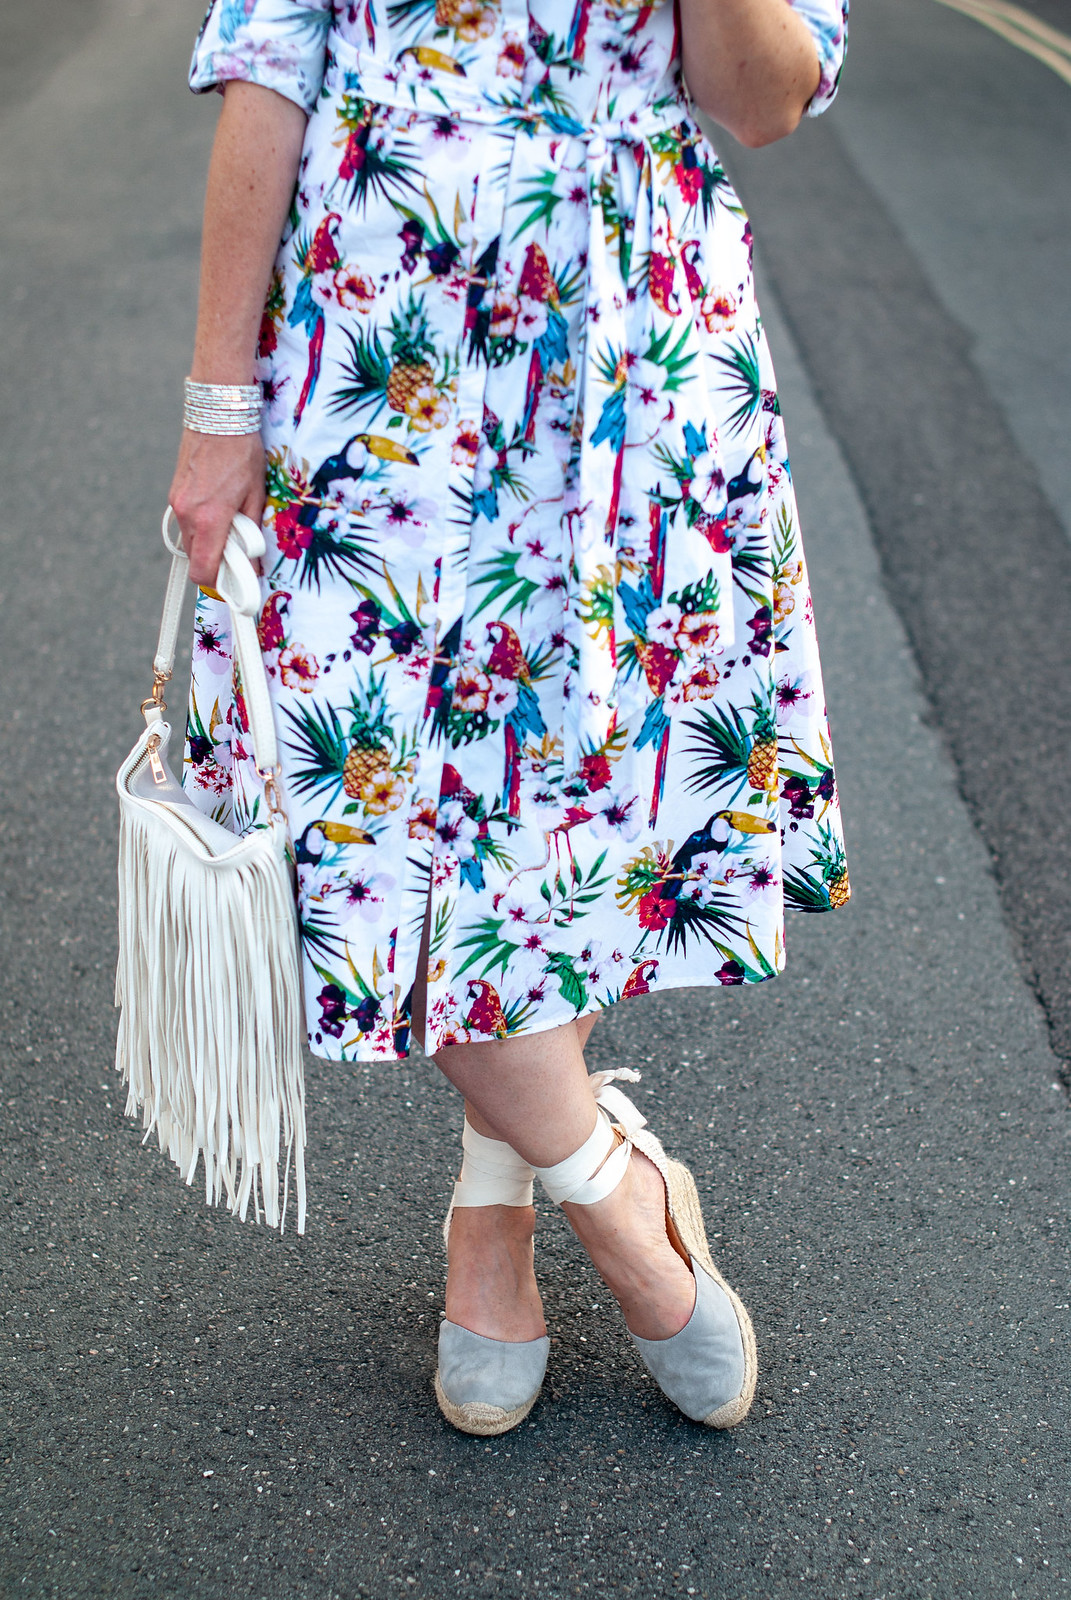 Florals With a Twist | A Loud Birds & Tropical Print \ tropical print midi shirt dress \ grey lace-up espadrilles \ red tassel earrings \ white fringed crossbody bag | Not Dressed As Lamb, over 40 style